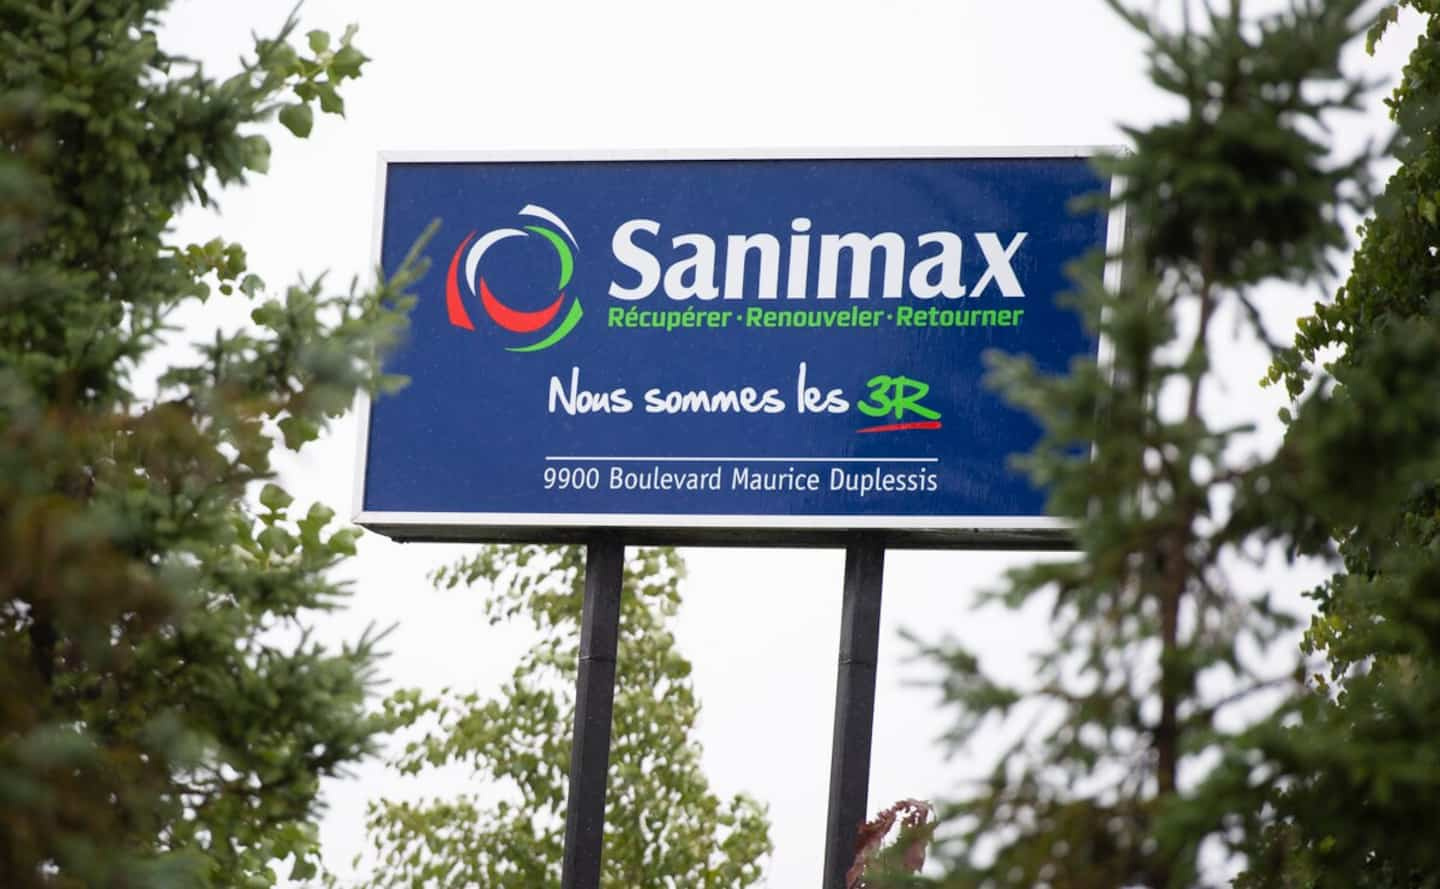 A settlement could solve the odor problems at the Sanimax plant